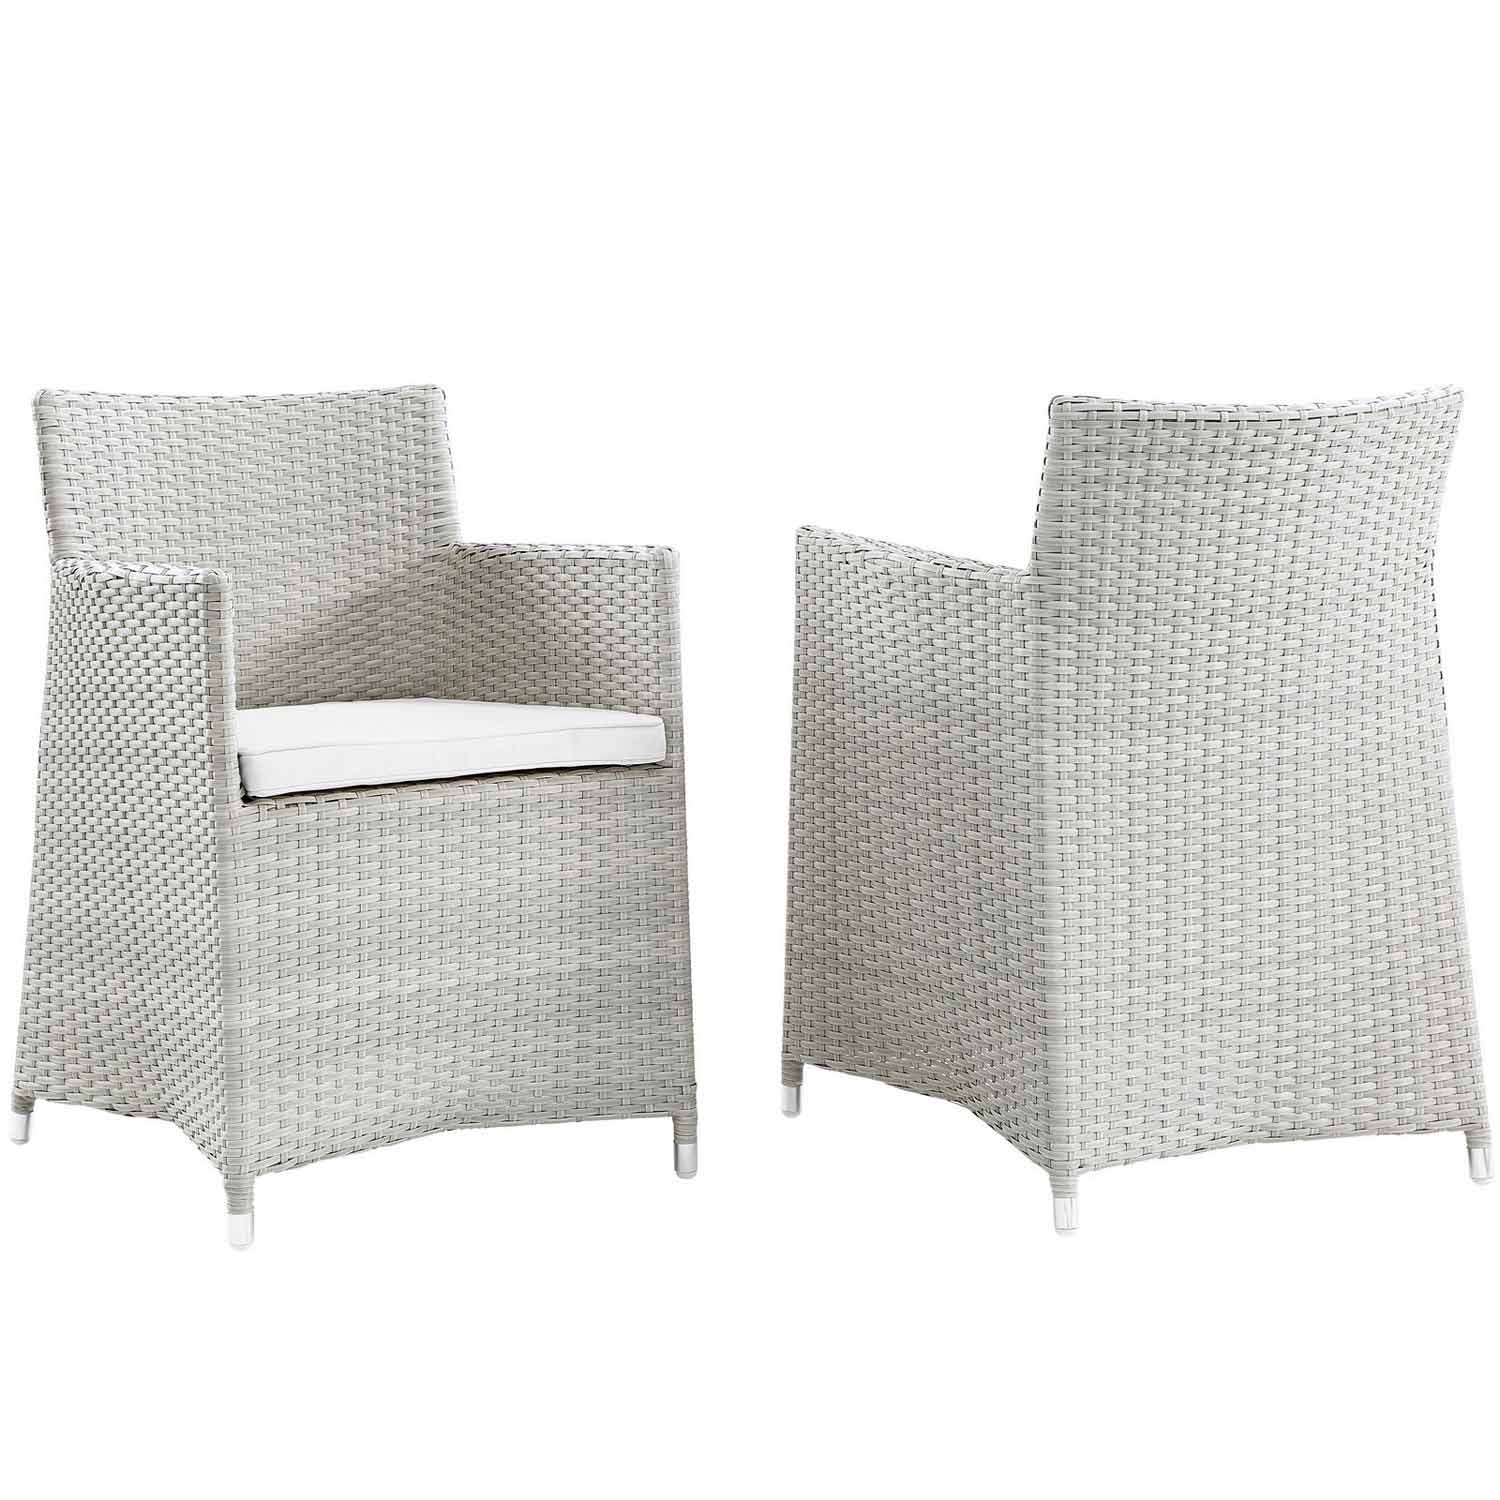 Modway Junction Armchair Outdoor Patio Wicker Set of 2 - Gray/White